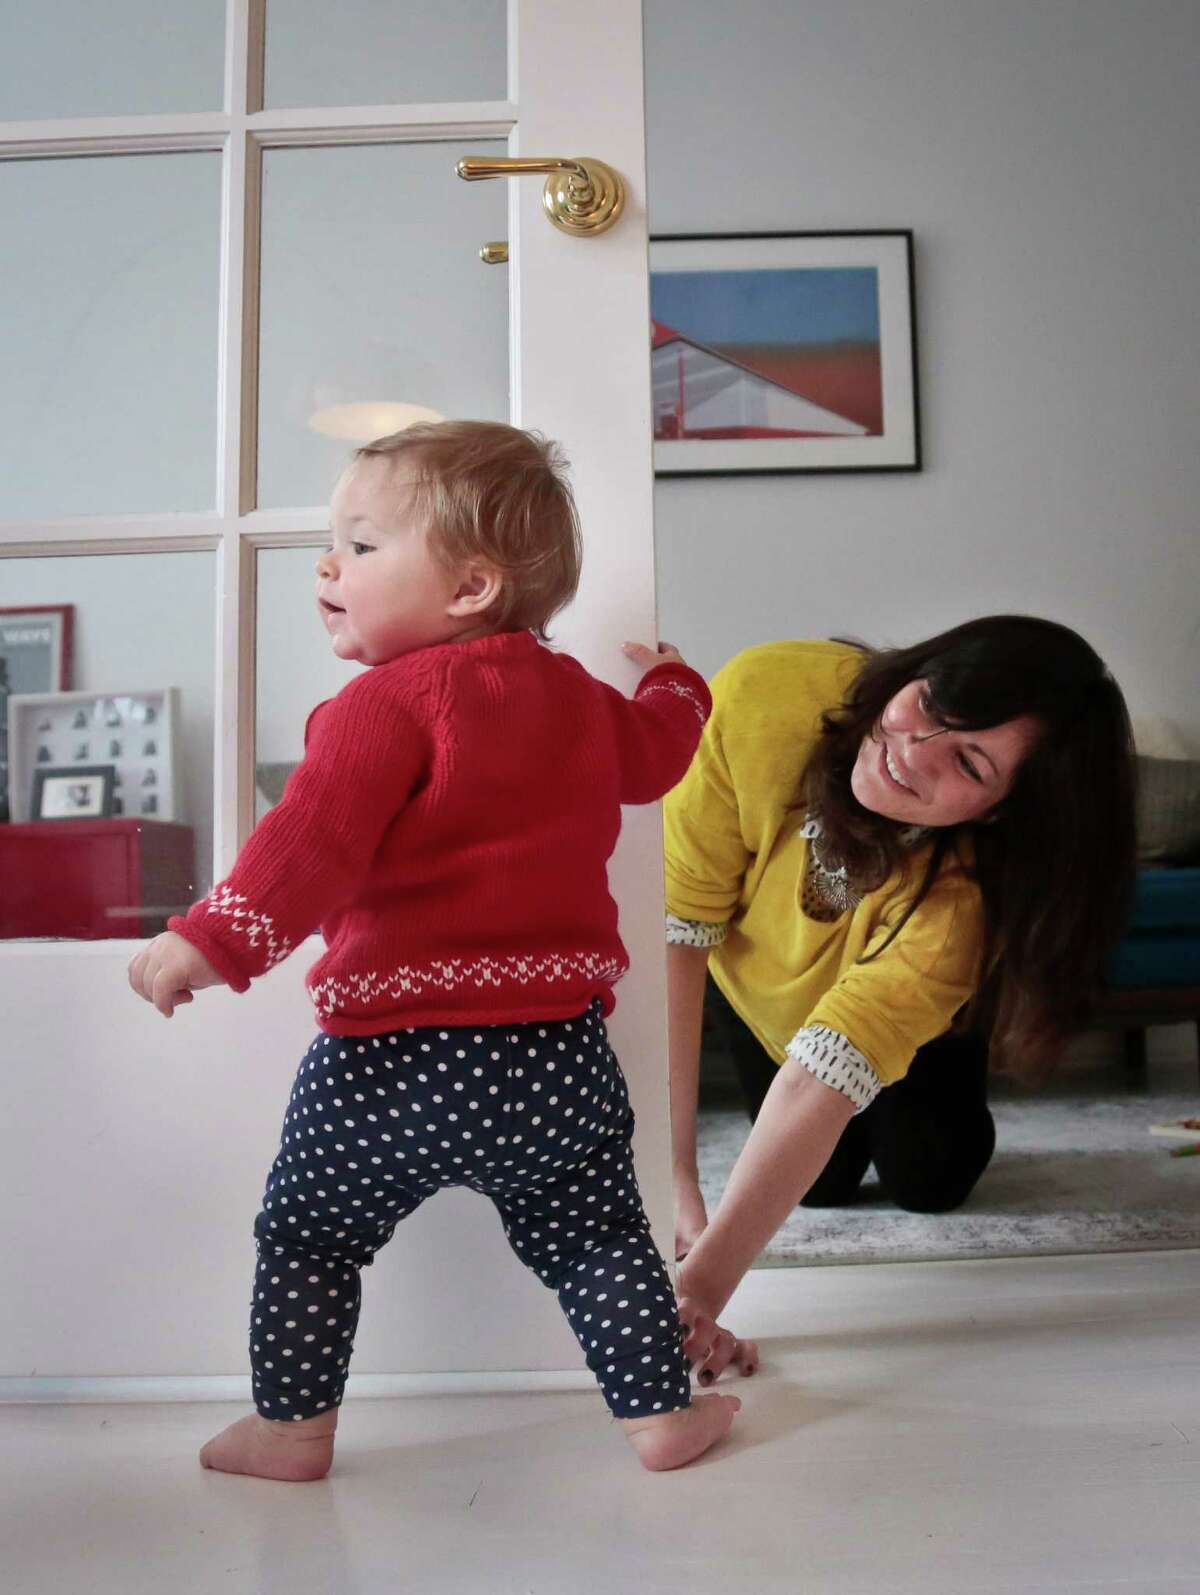 Shirin Majid plays with daughter Ella Townsend at their home in New York last month. Majid, who works for the Internet startup Quirky, is home during her company's quarterly "blackout" week break from work. CEO Ben Kaufman makes the company stop working and take breaks so employees don't burn out.